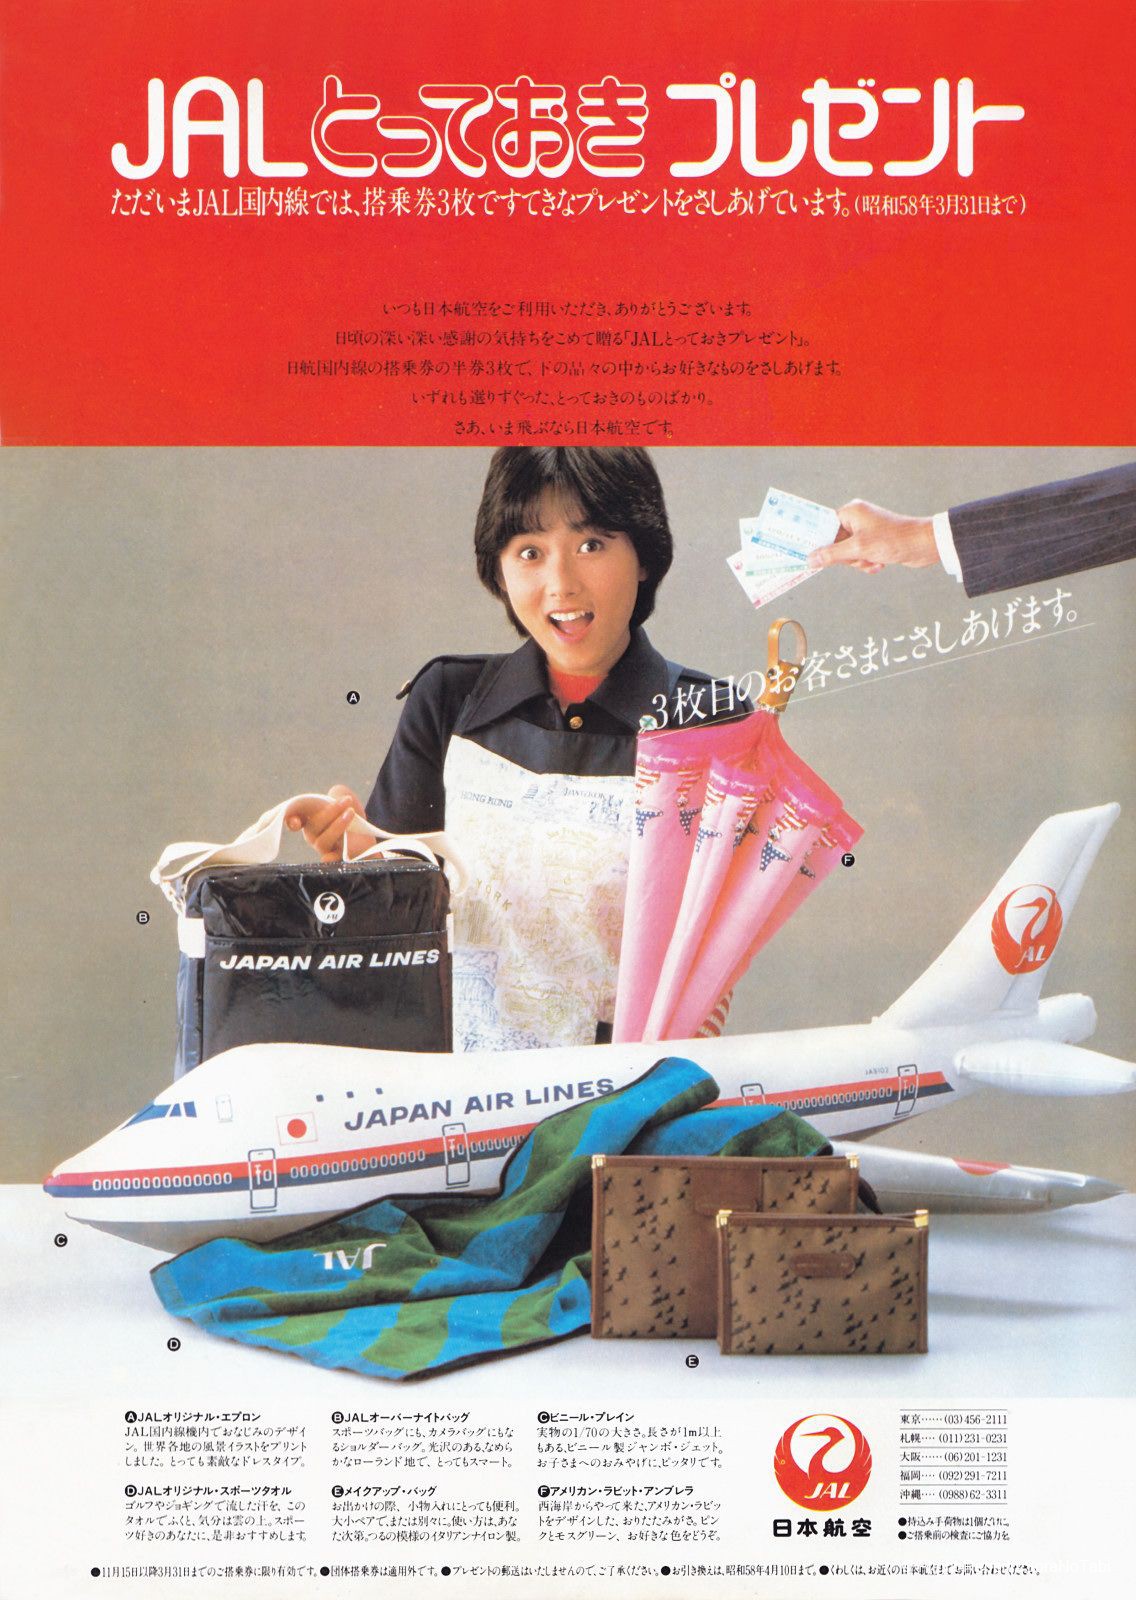 photo jal-poster-70s